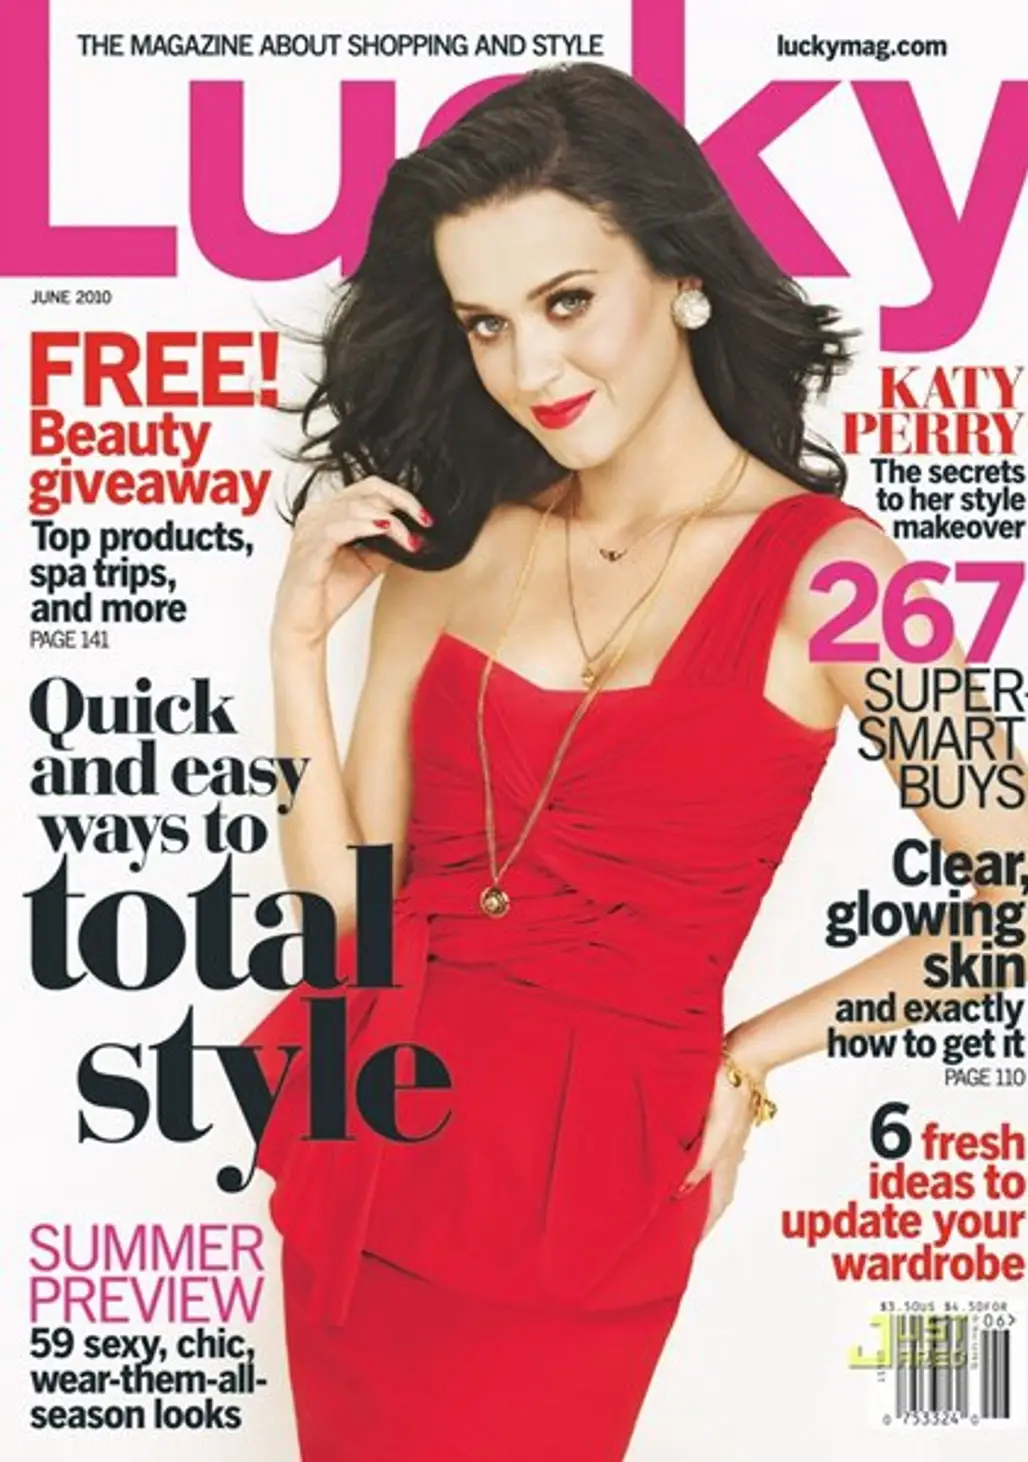 Katy Perry for Lucky Magazine